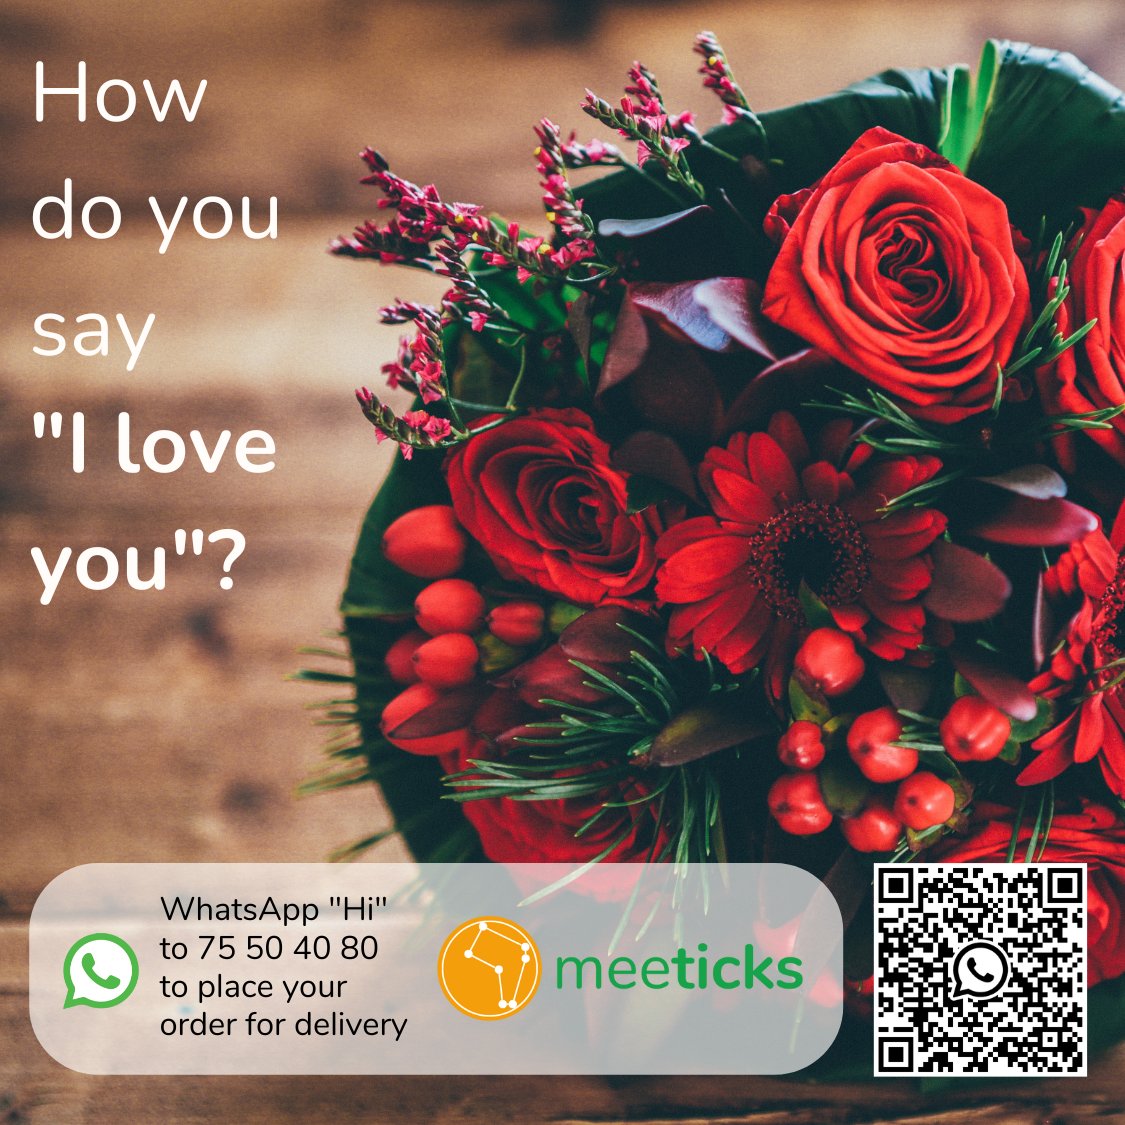 How do you say 'I love you' in your language?
In iKalanga, Setswana and English - actions speak louder than words. ☺️🥰
Order roses and flowers for your loved ones on Meeticks.
WhatsApp Hi to 75504080 - and get them delivered!

#LinkInBio #LetsGroBW